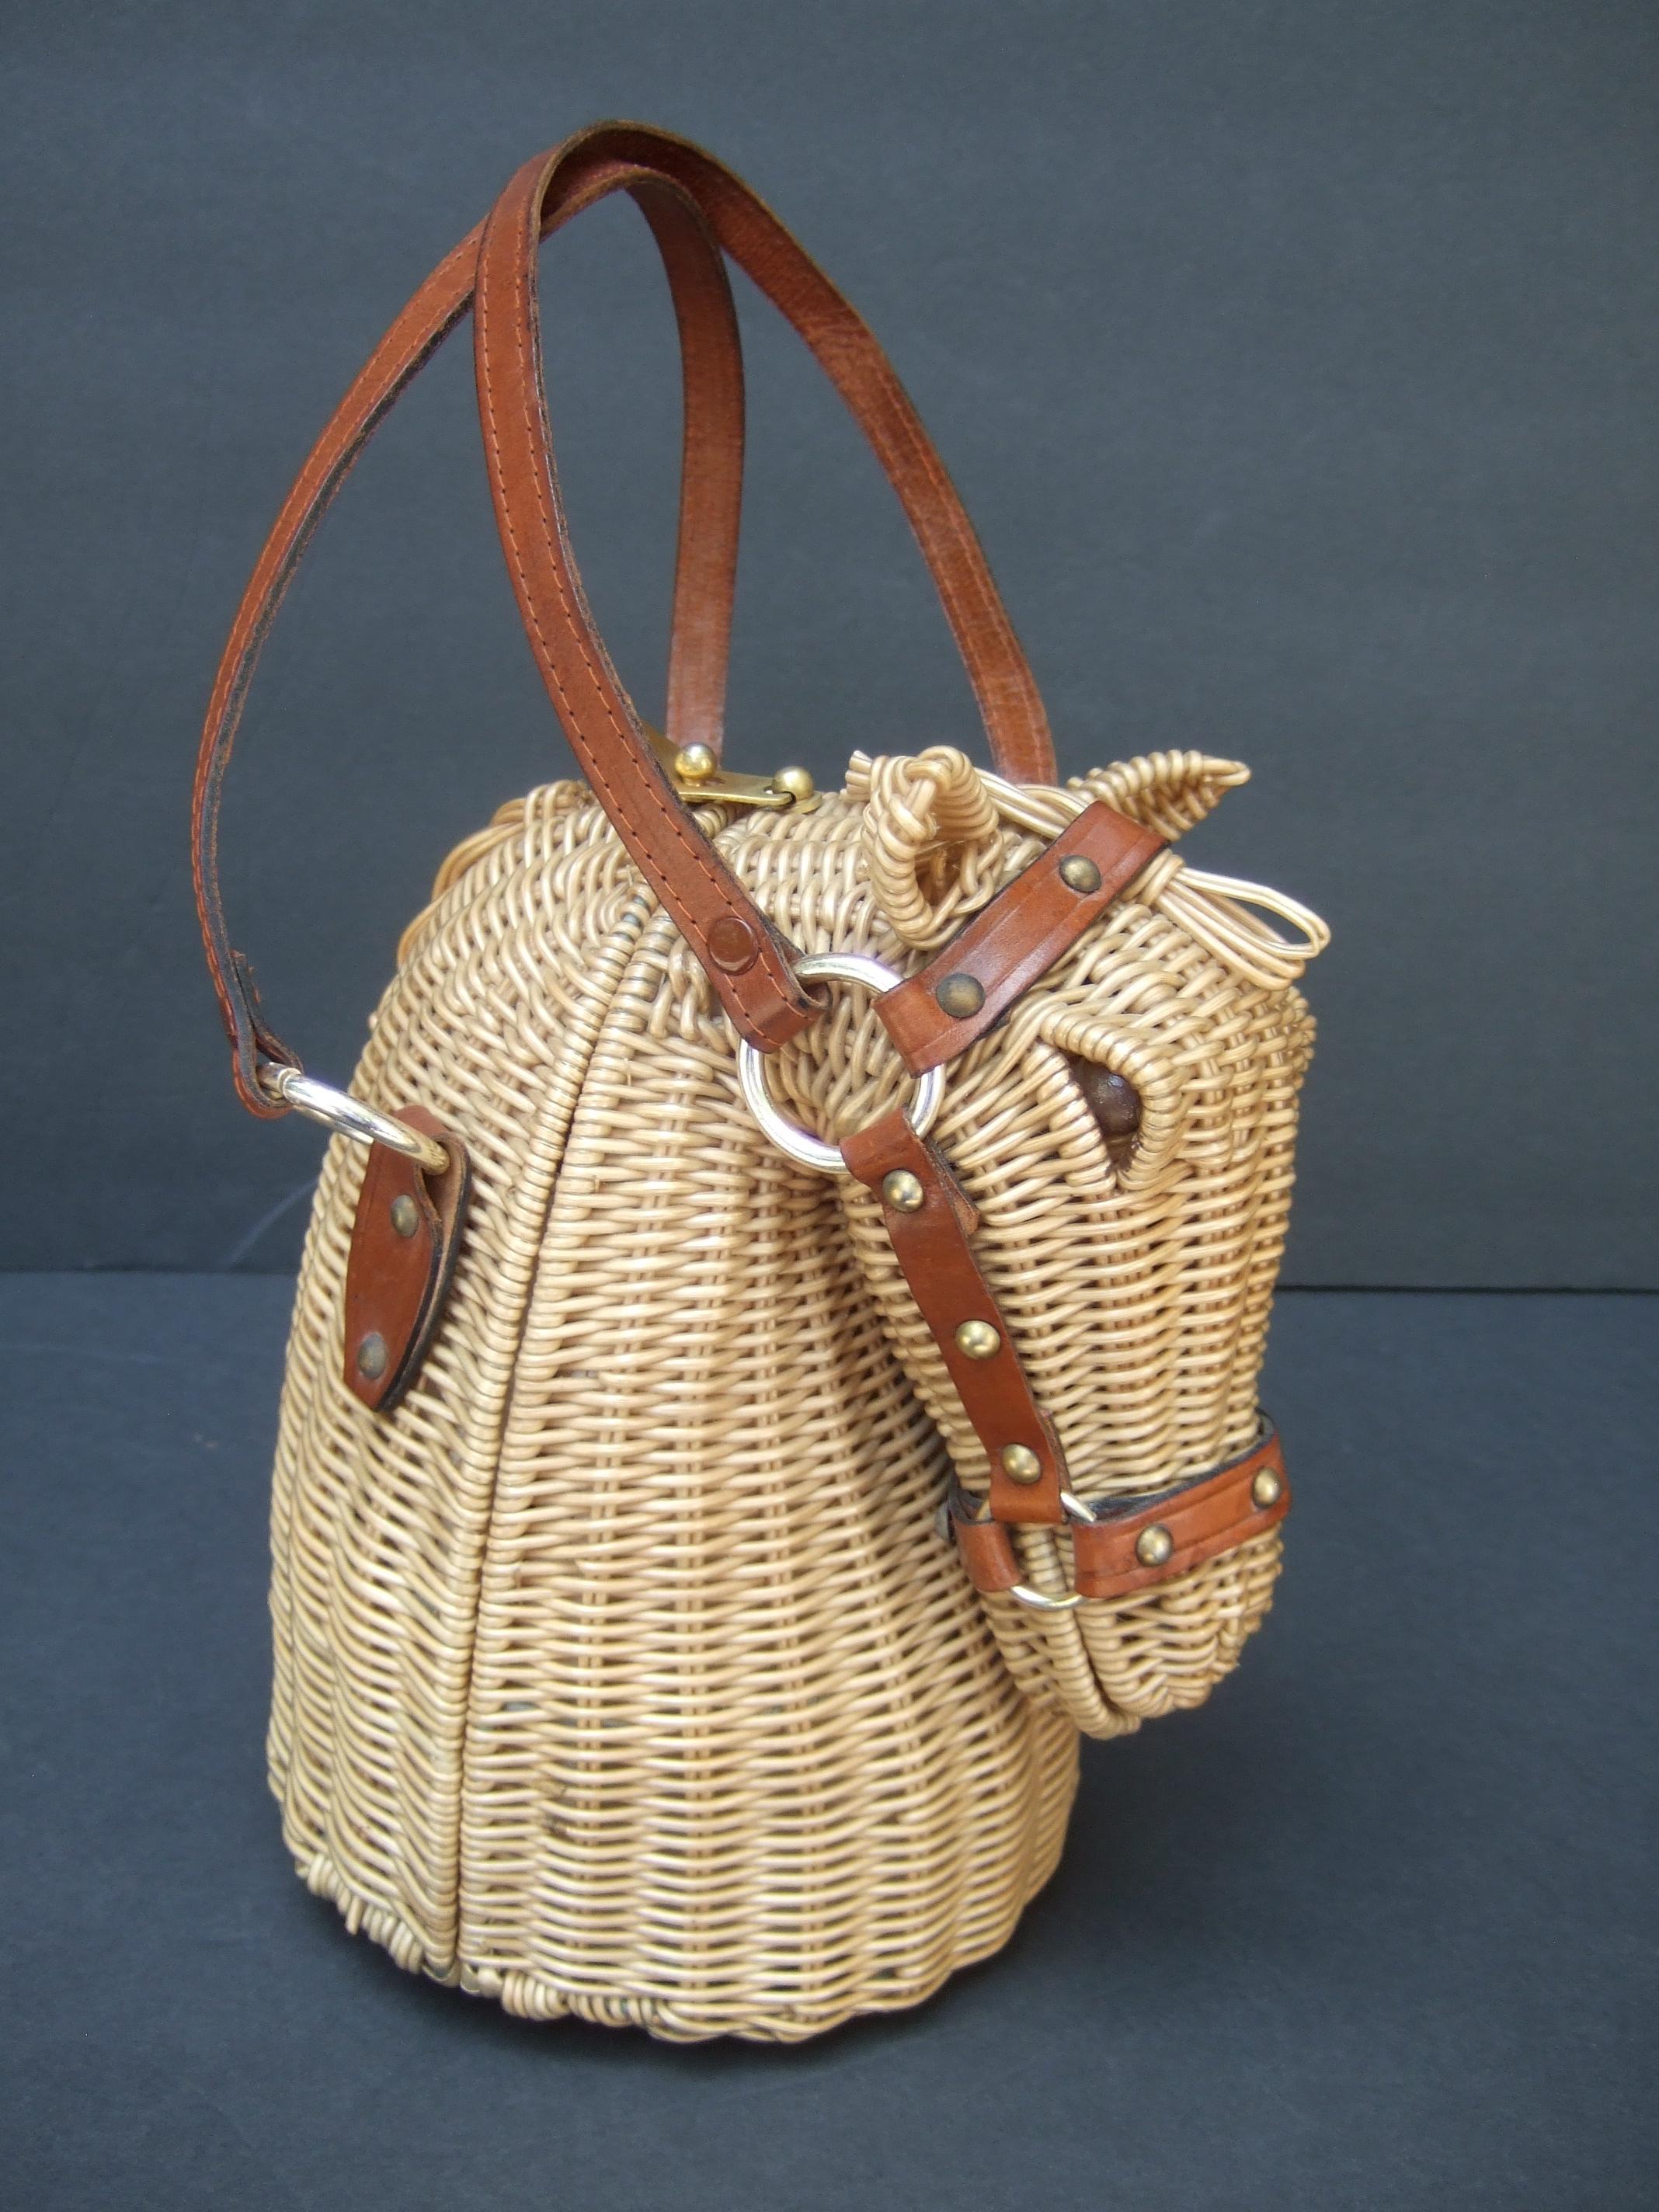 Extremely rare wicker rattan equine horse head handbag designed by Marcus Brothers c 1970
The three dimensional wicker rattan horse head is designed with woven wicker rattan bands
The glass marble eyes are distinguished with brown enamel